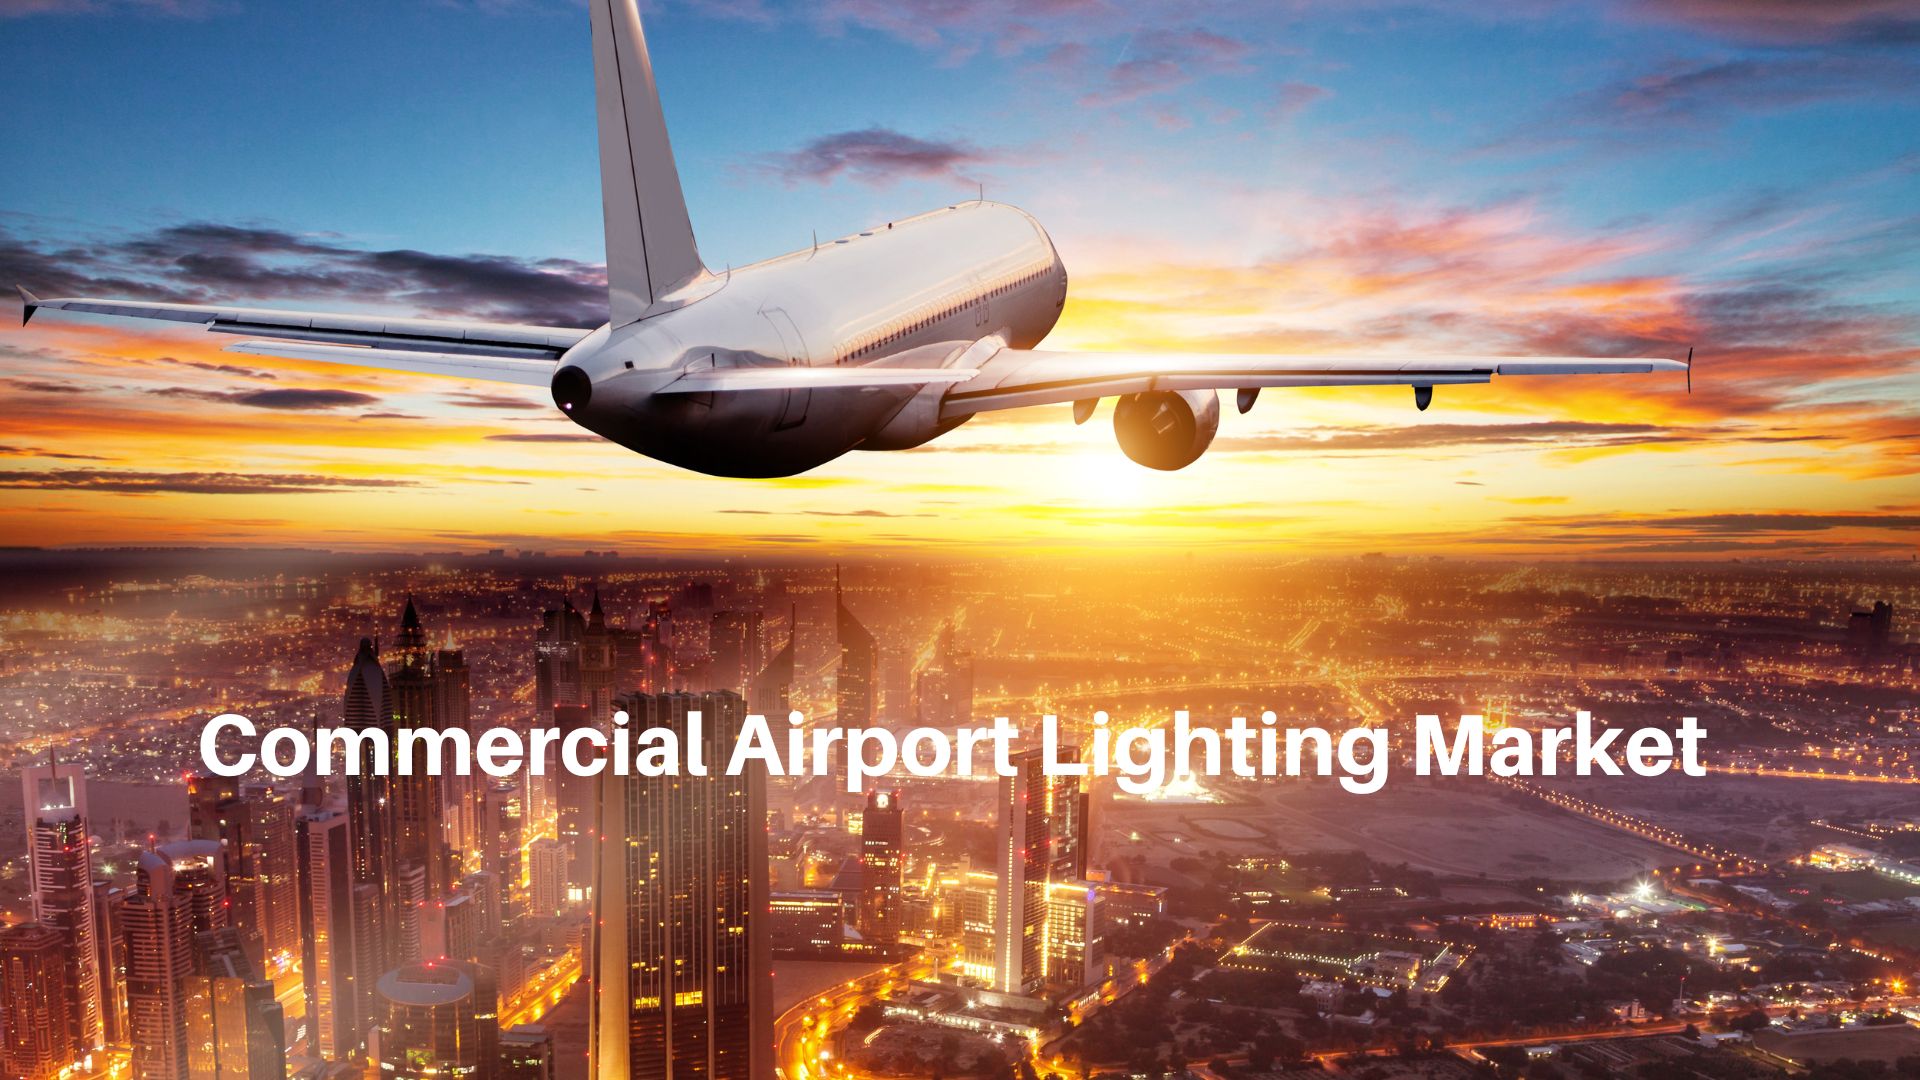 Commercial Airport Lighting Market Globally Expected to Drive Growth Nearly USD 5.53 Bn By 2033